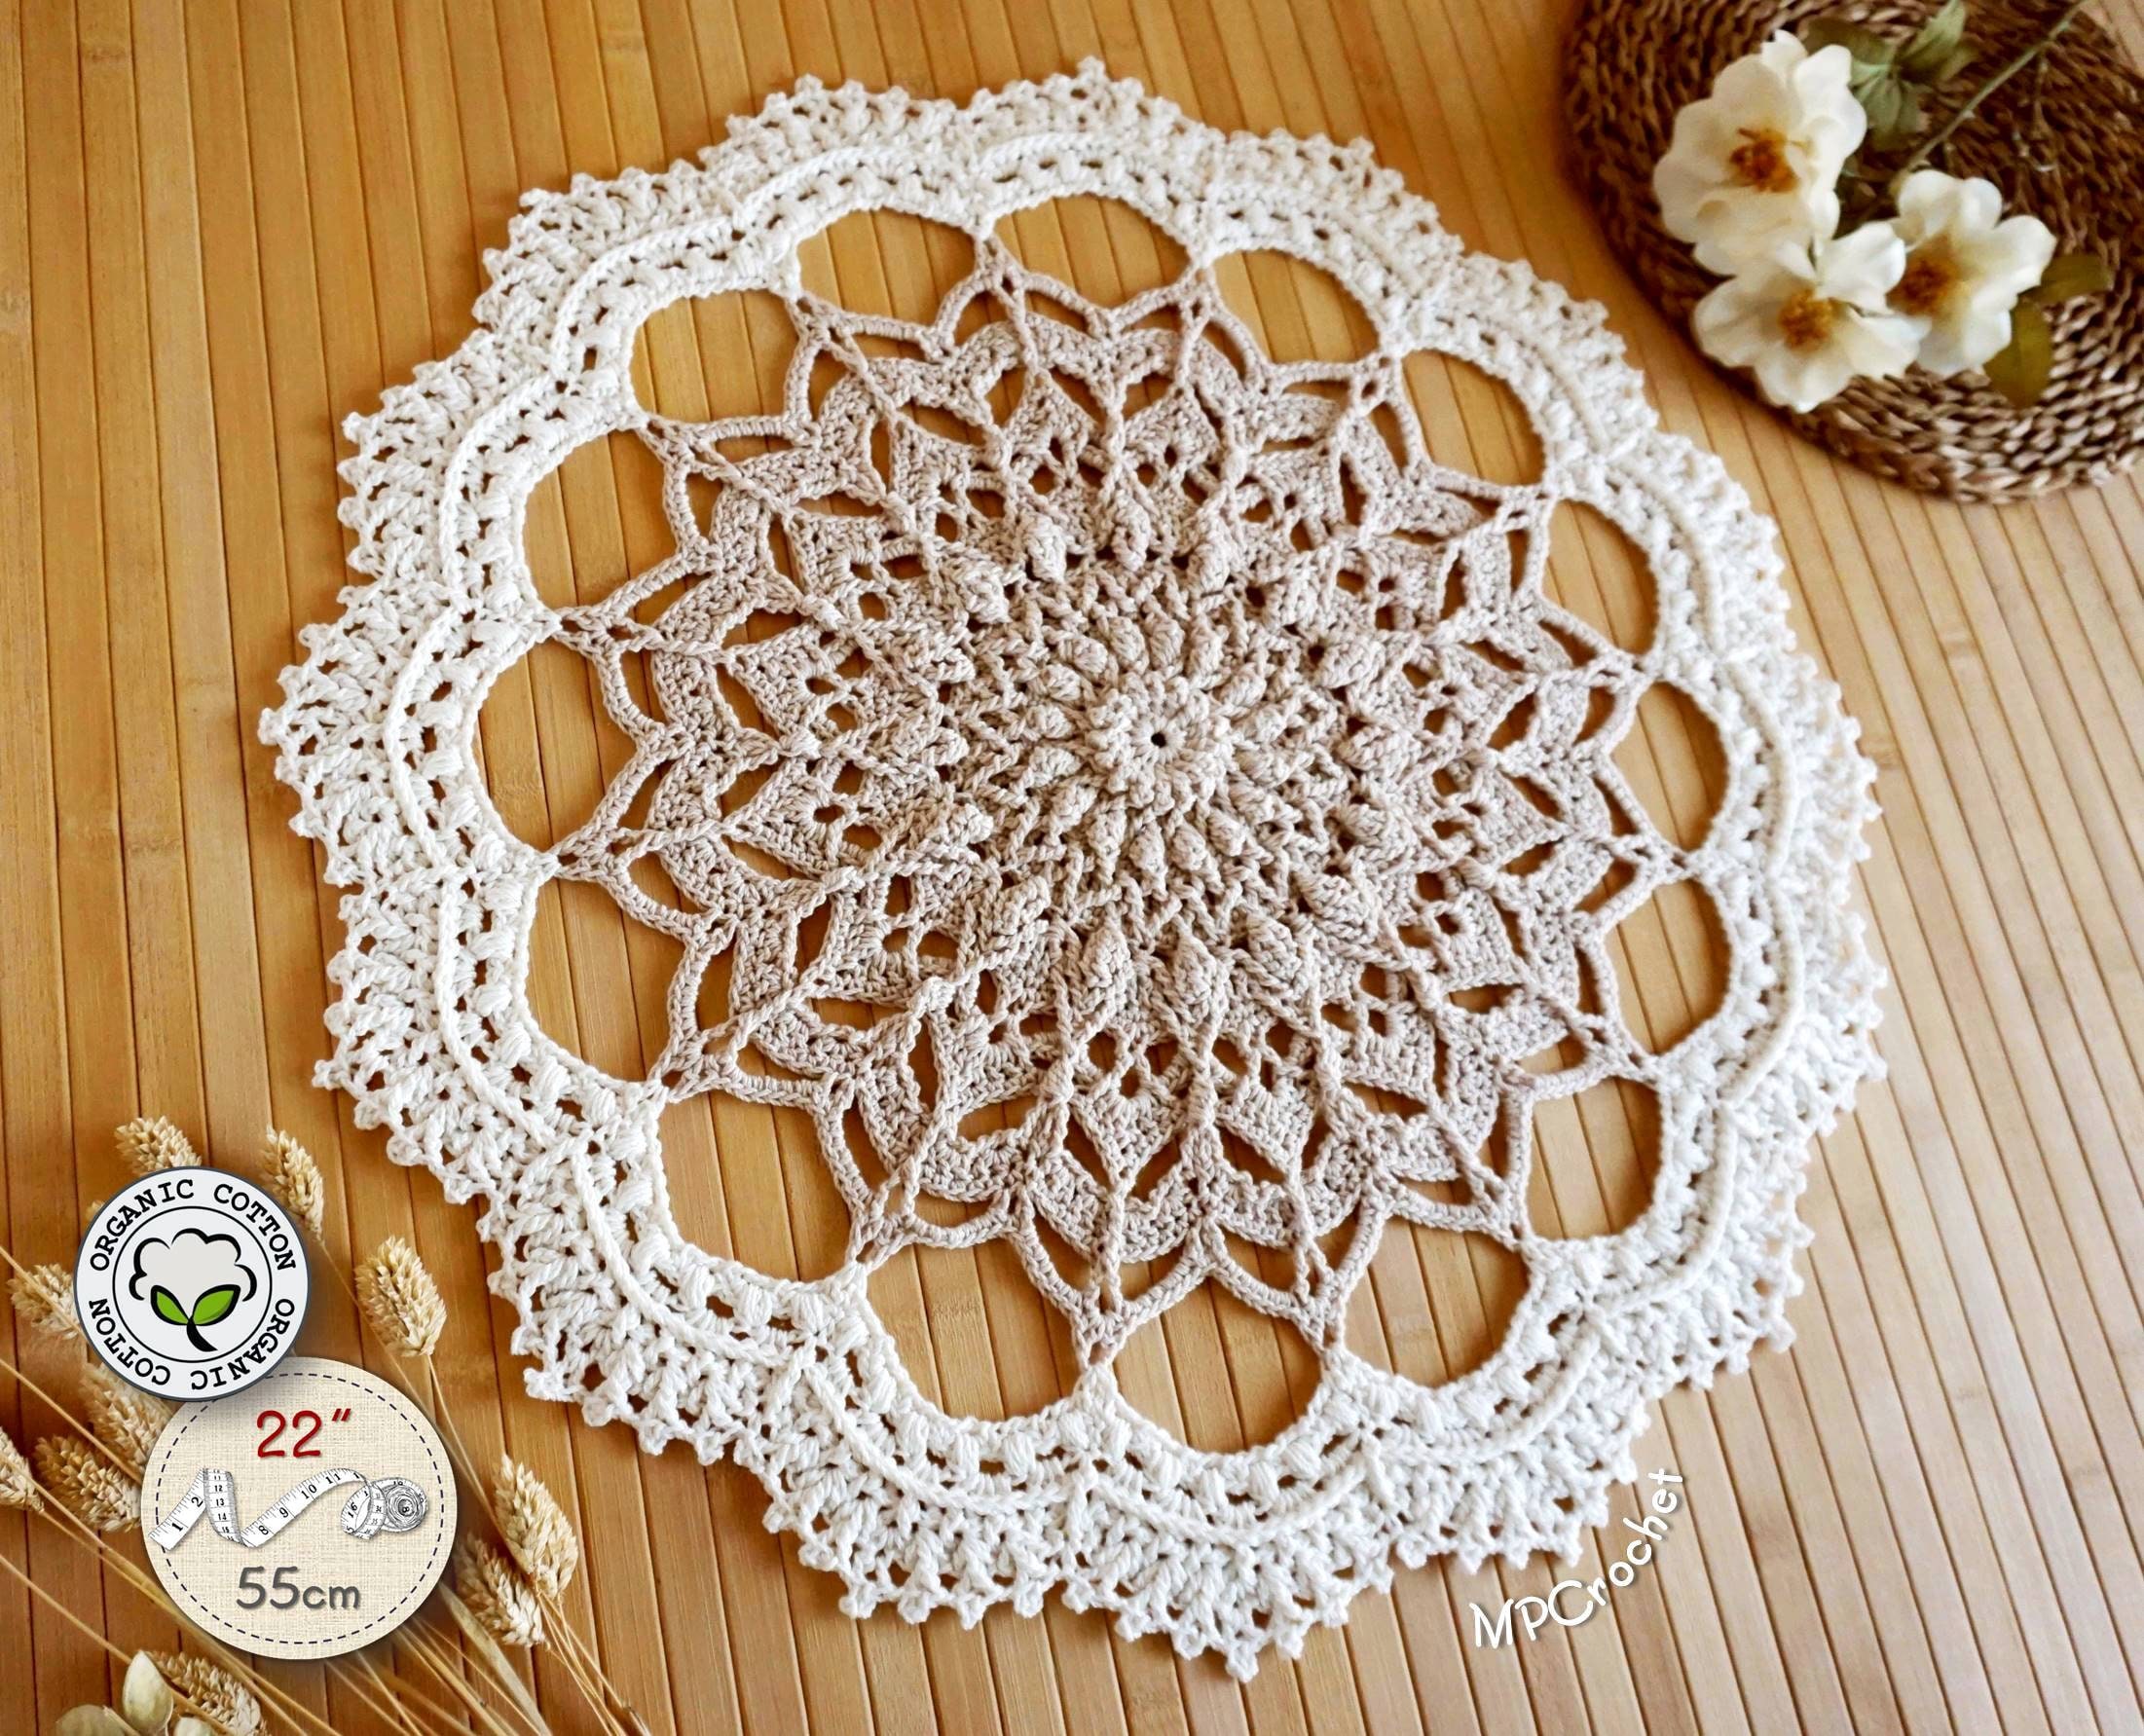 11.5 inch Bloom Shaped Crochet Lace Doily Placemats, Handmade Cotton Doilies - Beige (2 Pack)